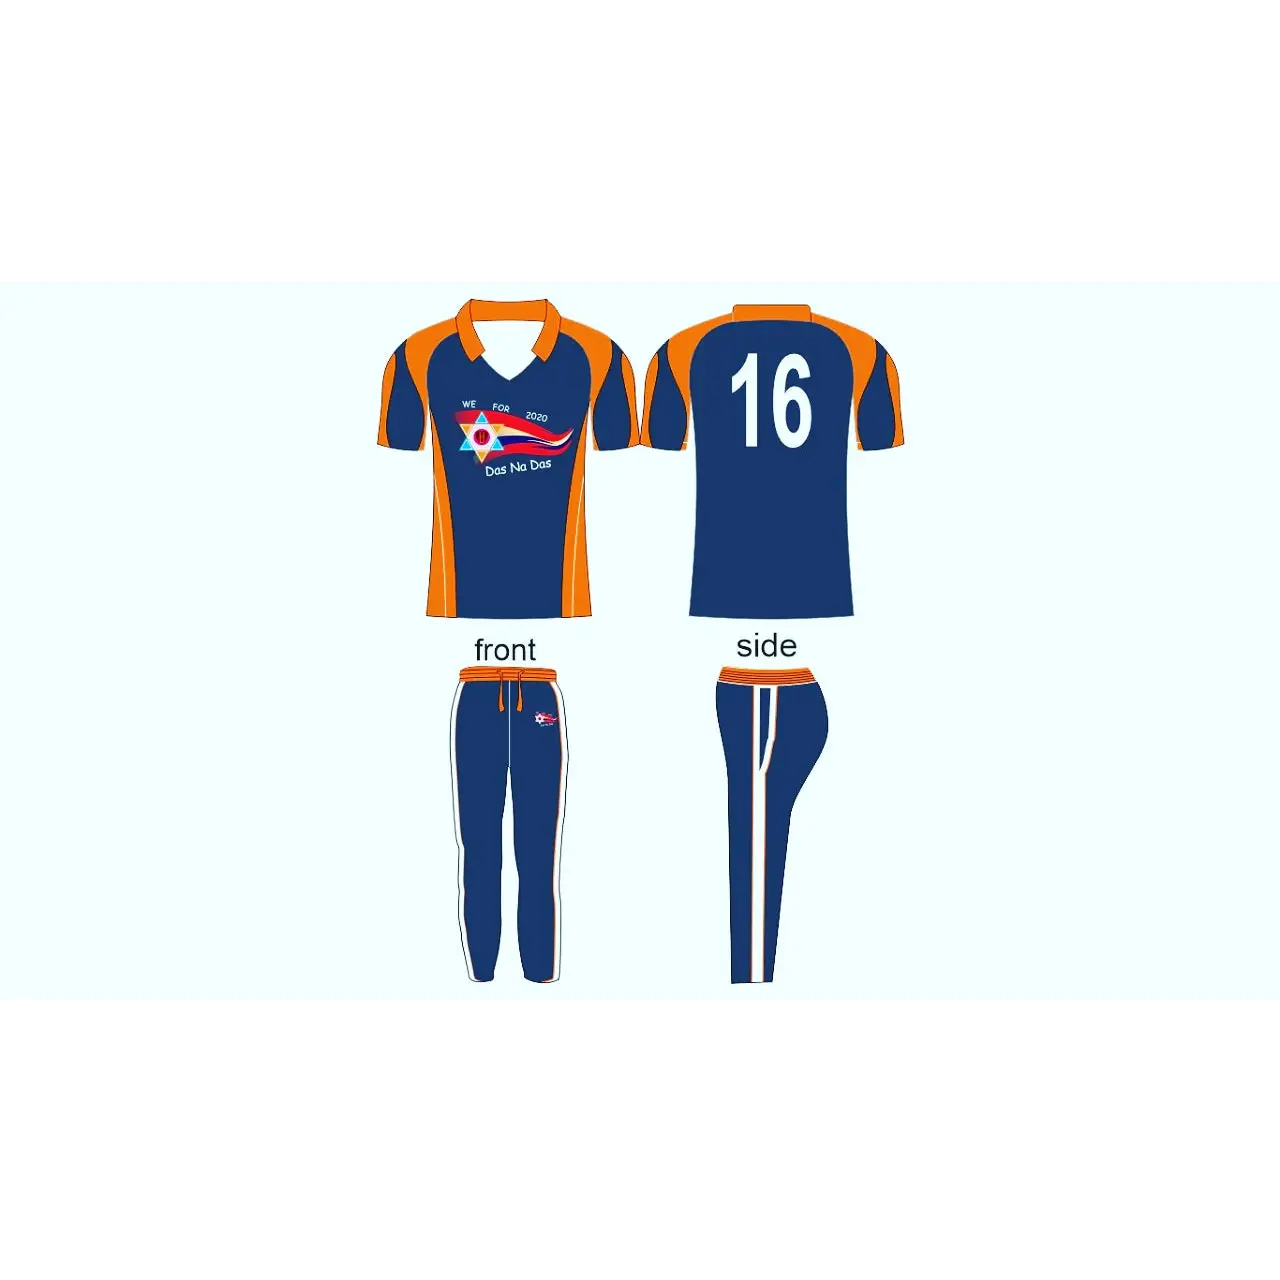 Cricket Shirt and Trouser Fully Customized With Team Name Logo and Number - Orange & Blue - Custom Cricket Wear 2PC Full